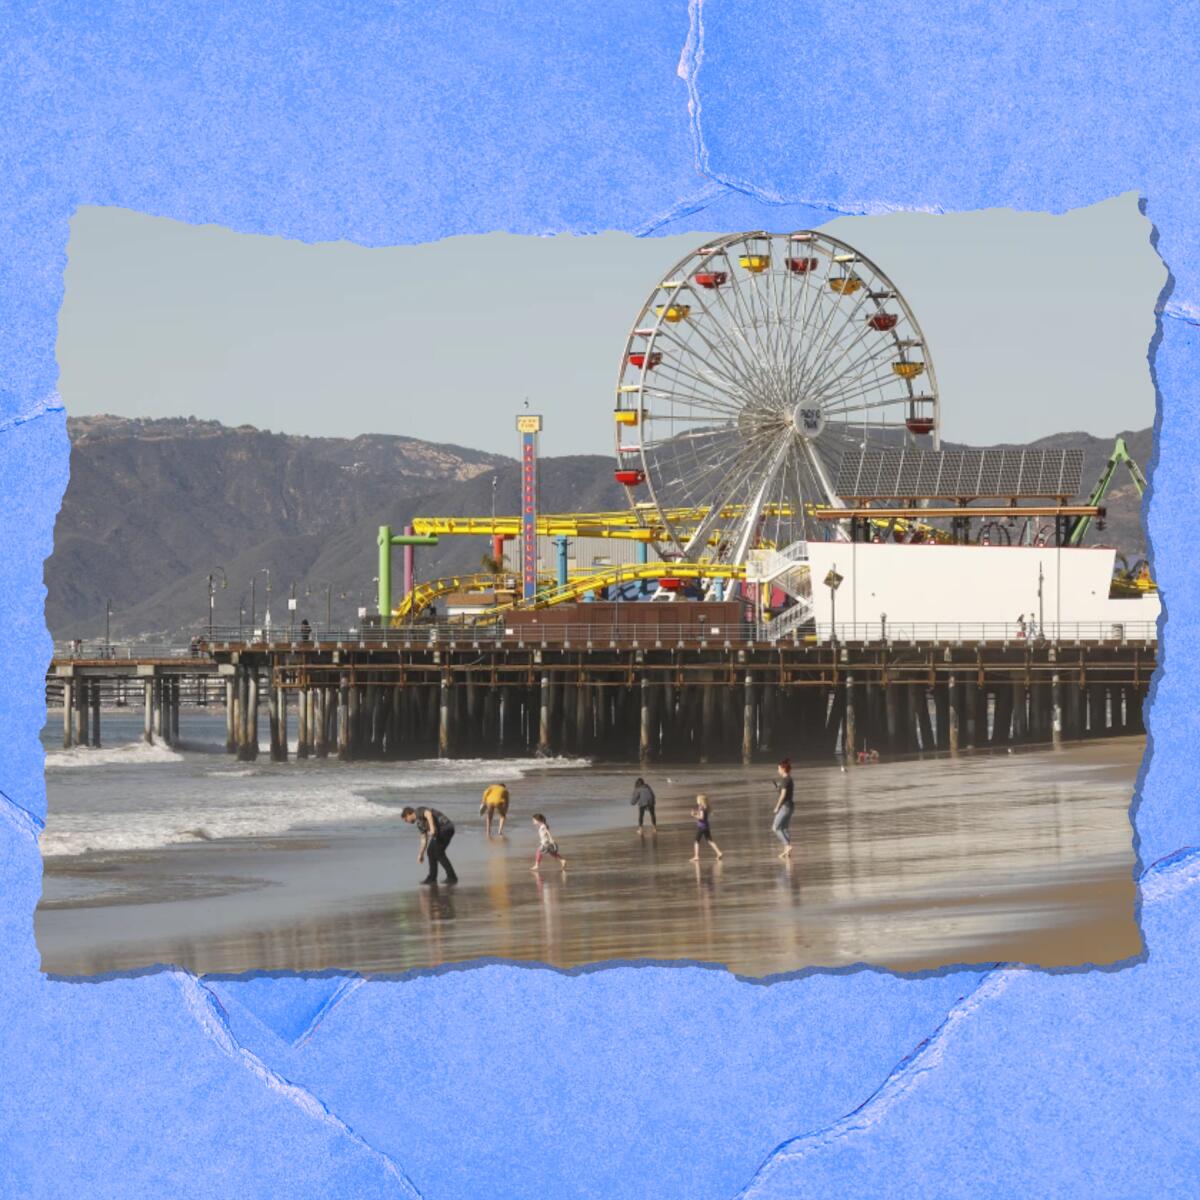 A pier with a Ferris wheel is seen from a distance. People in the foreground walk on the beach.